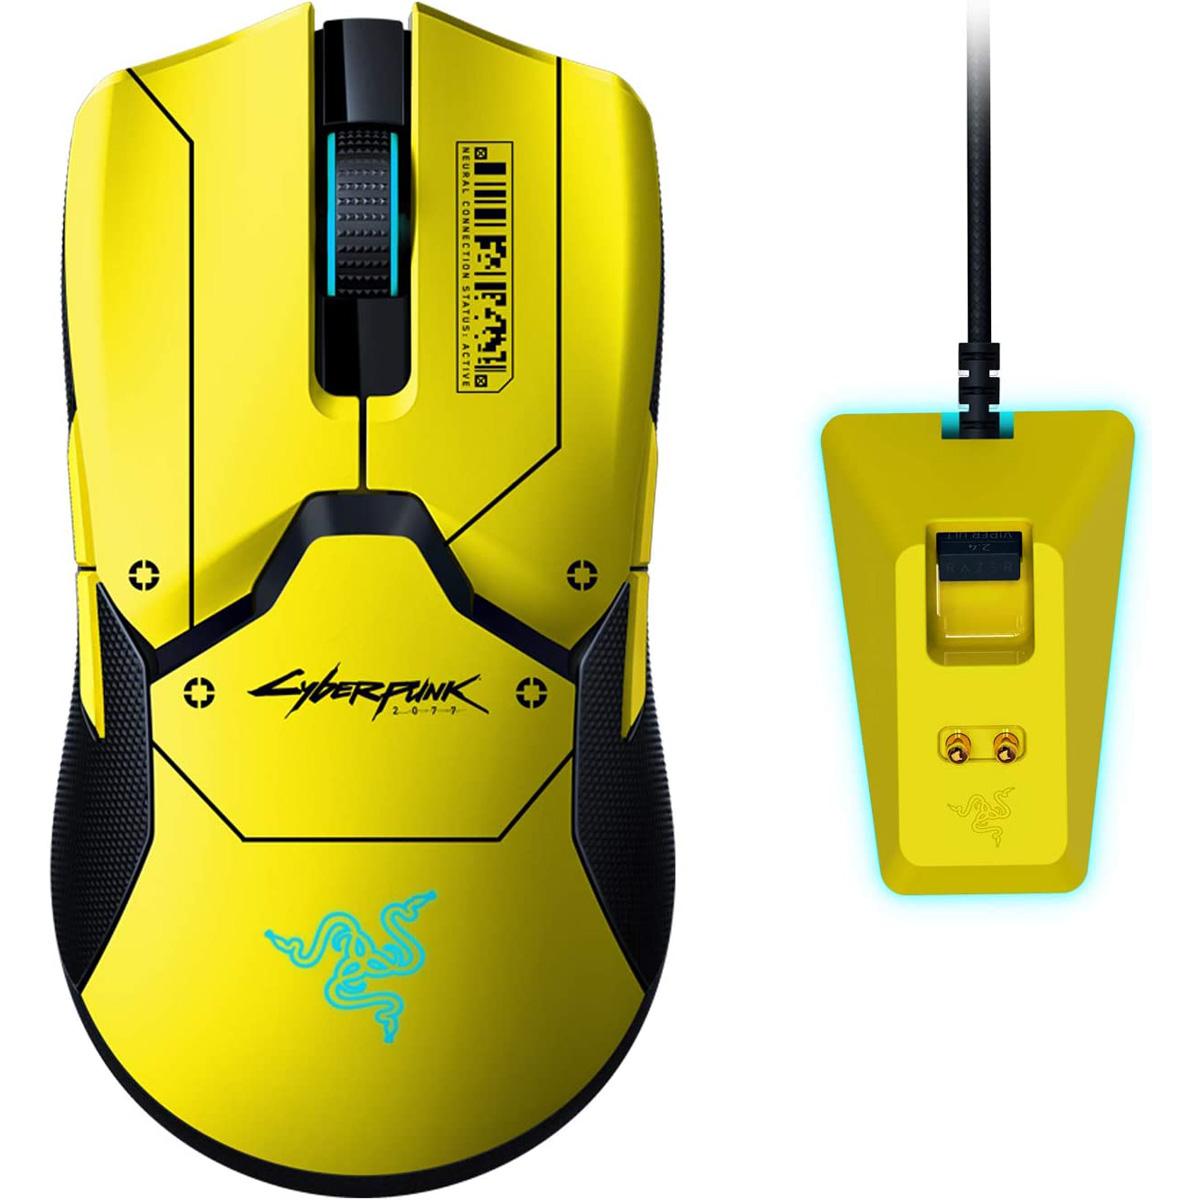 Razer Cyberpunk Viper Ultimate Lightweight Wireless Gaming Mouse for $79.99 Shipped